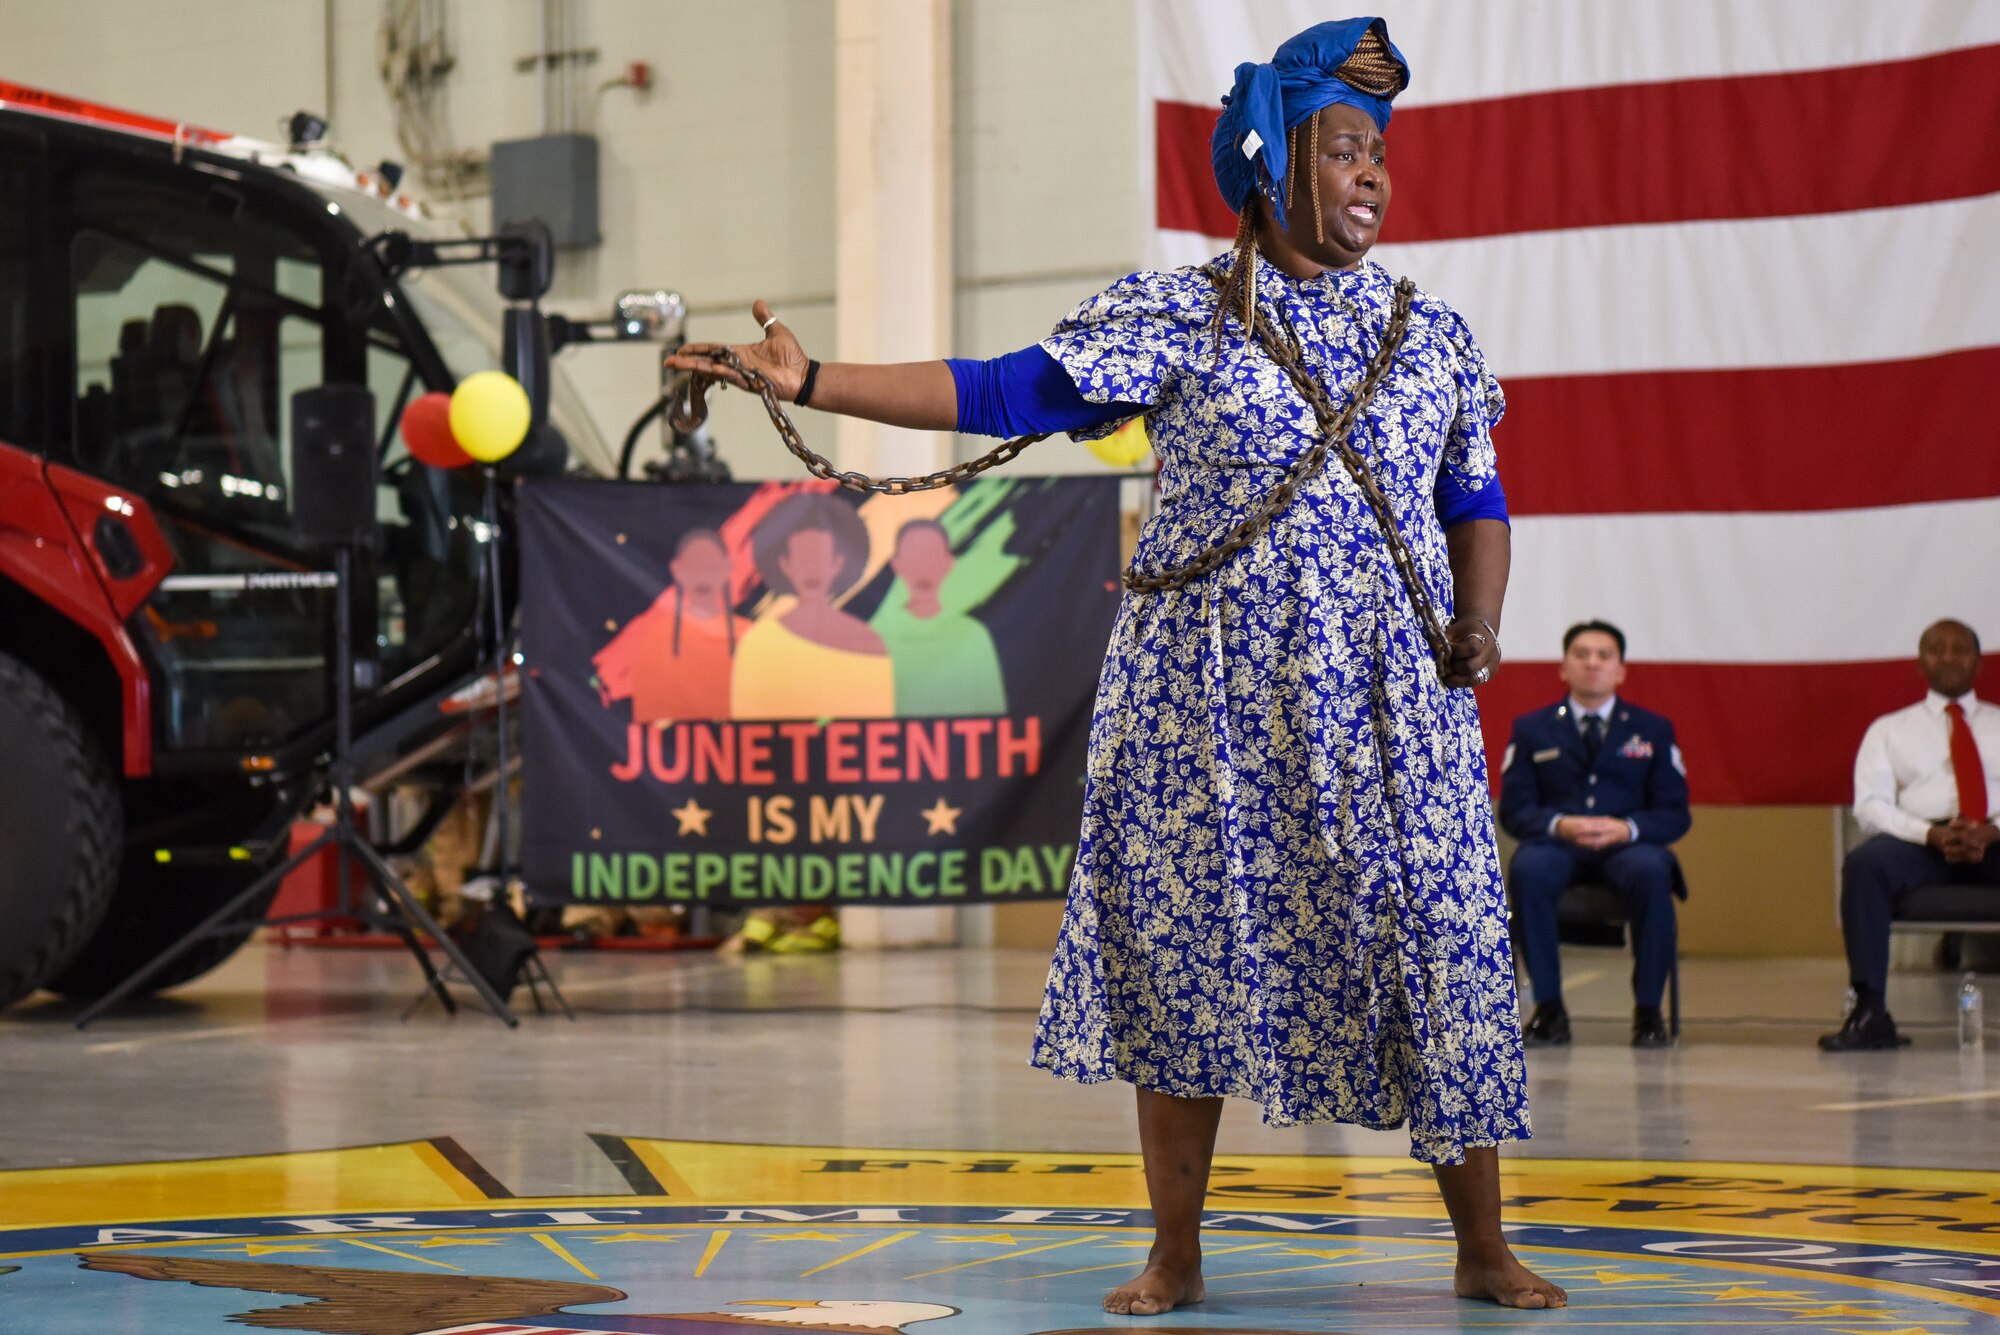 Alicia Wilder Walters, 17th Training Support Squadron instructor, performs an interactive spoken word rendition during the Juneteenth commemoration ceremony at Goodfellow Air Force Base, Texas, June 16, 2022. The purpose of the ceremony was to educate and celebrate resilience, resistance and liberation. (U.S. Air Force photo by Staff Sgt. Jermaine Ayers)